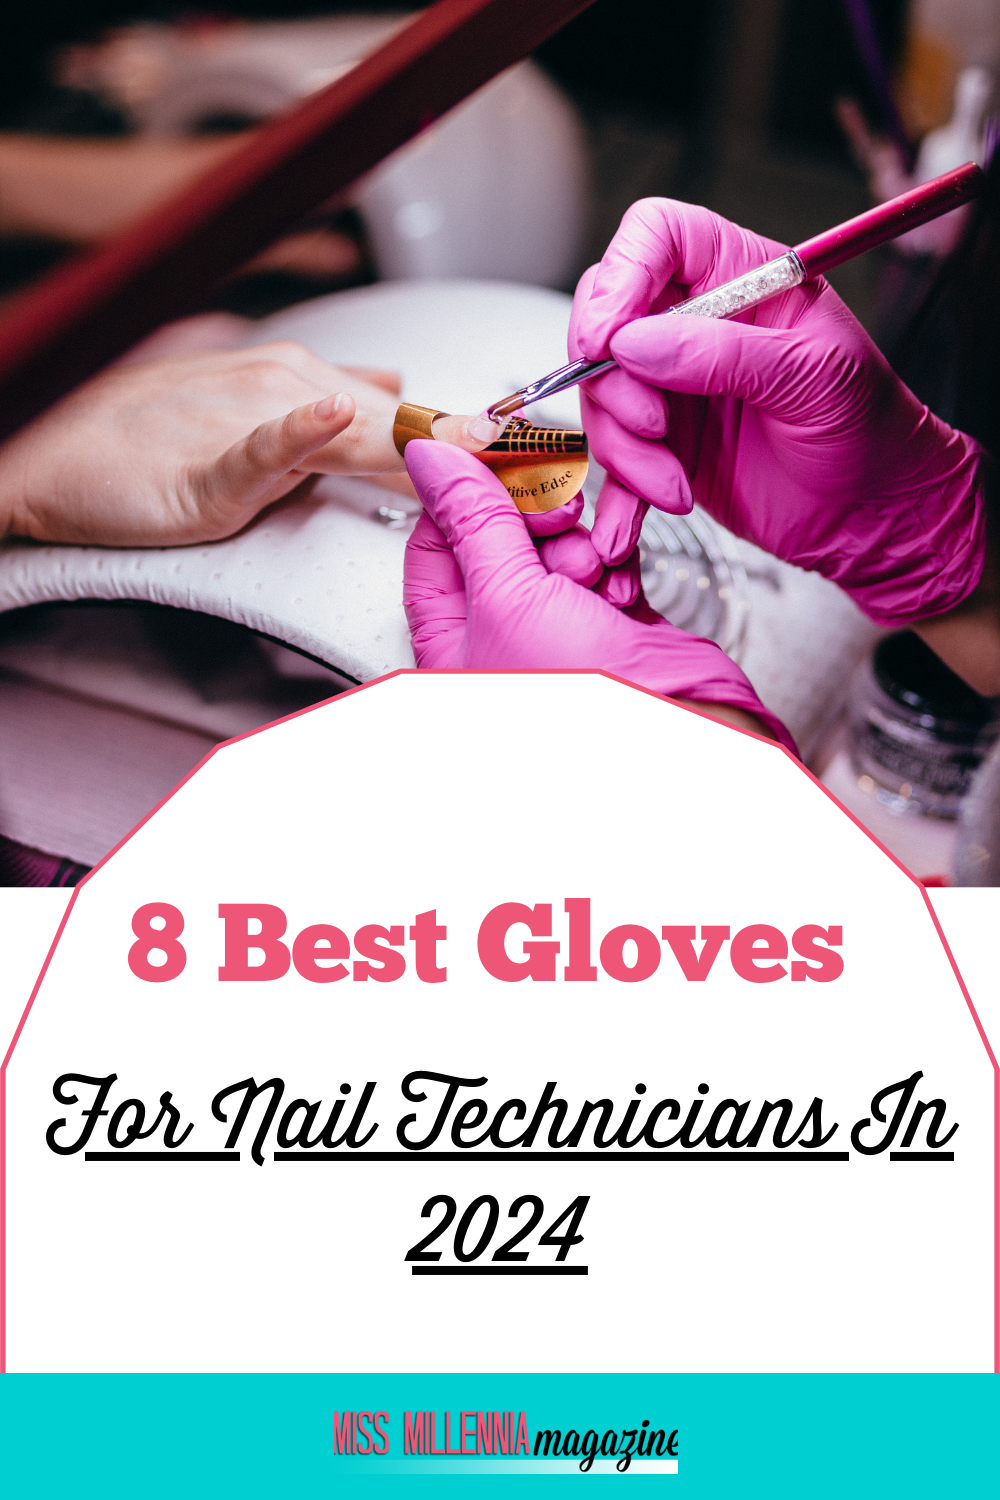 8 Best Gloves For Nail Technicians In 2024